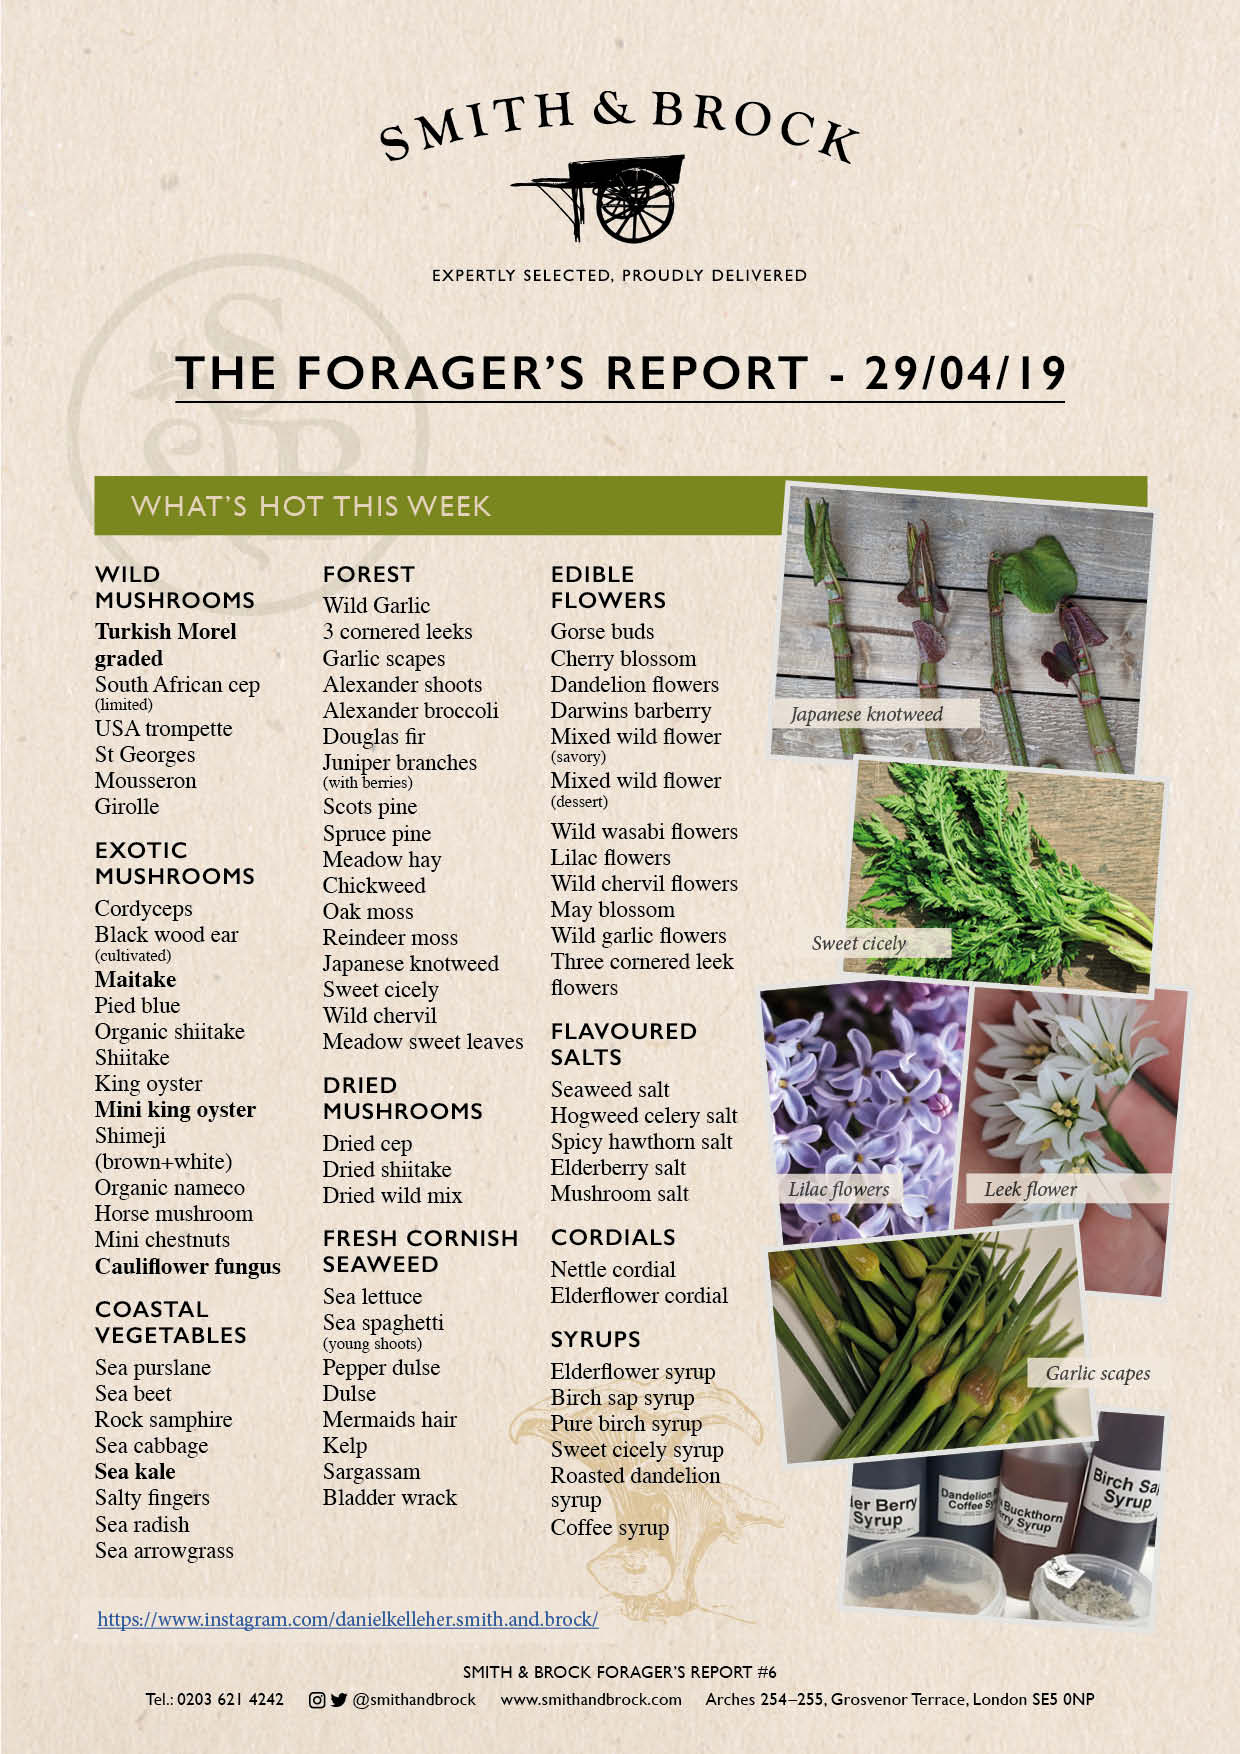 Smith&Brock Foraged Products Report 29 Apr 2019 #6